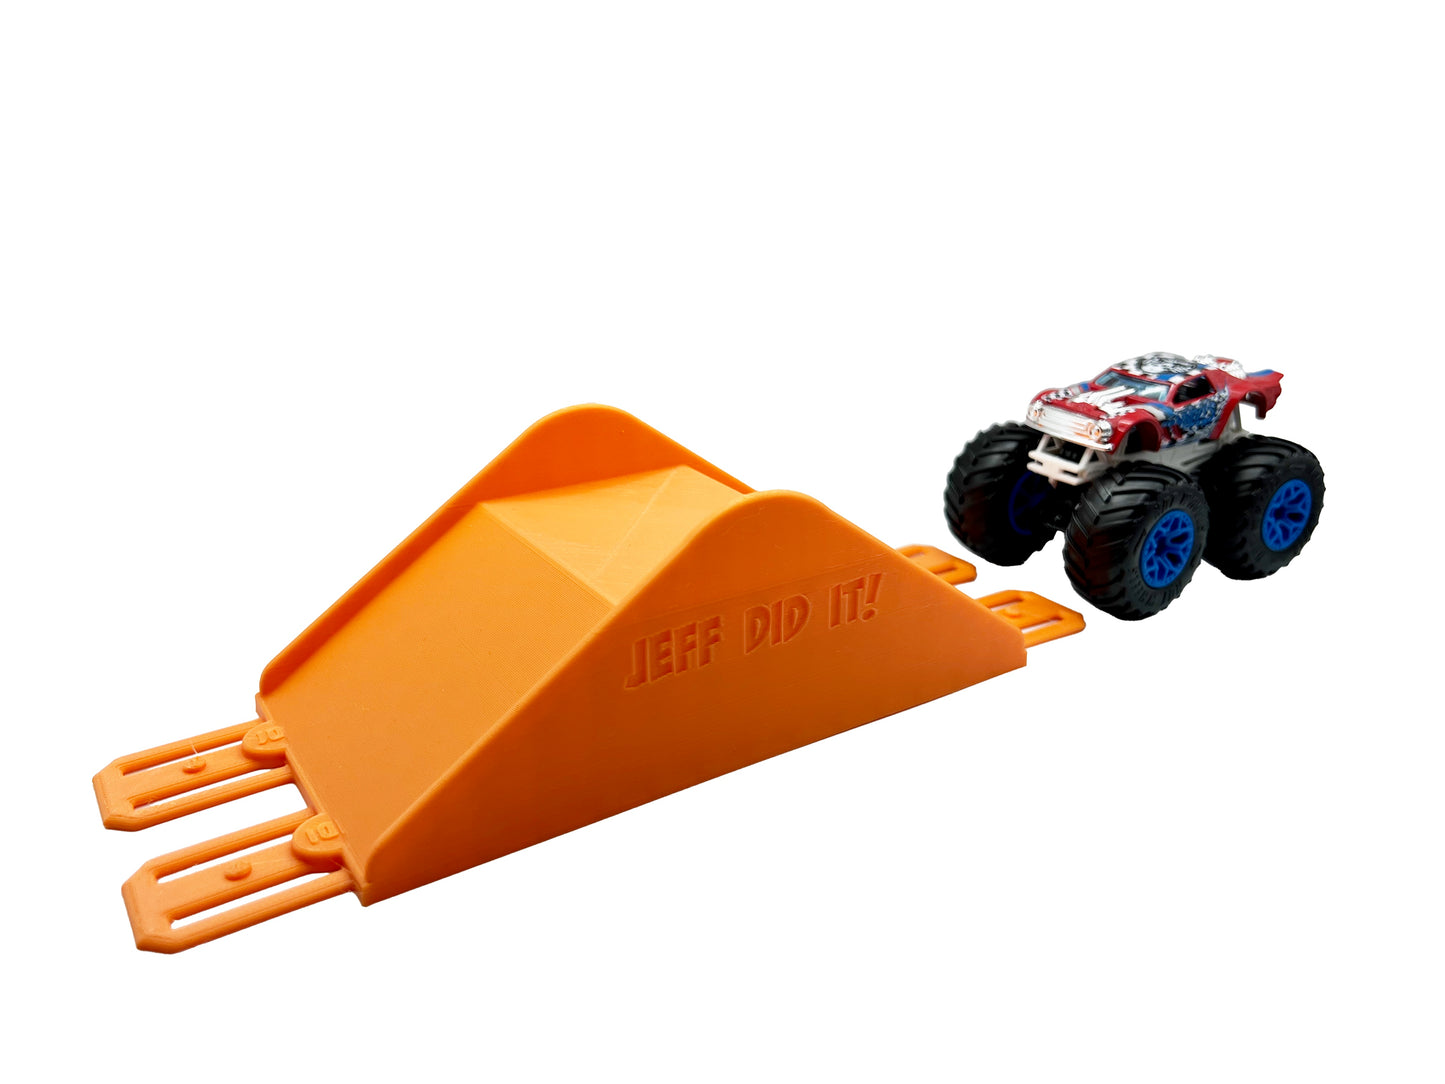 Jeff Did It! - Hot Wheels Monster Truck - 2 Lane Table Top Jump - 3D Printed - Designed and Made in the USA - Free Shipping